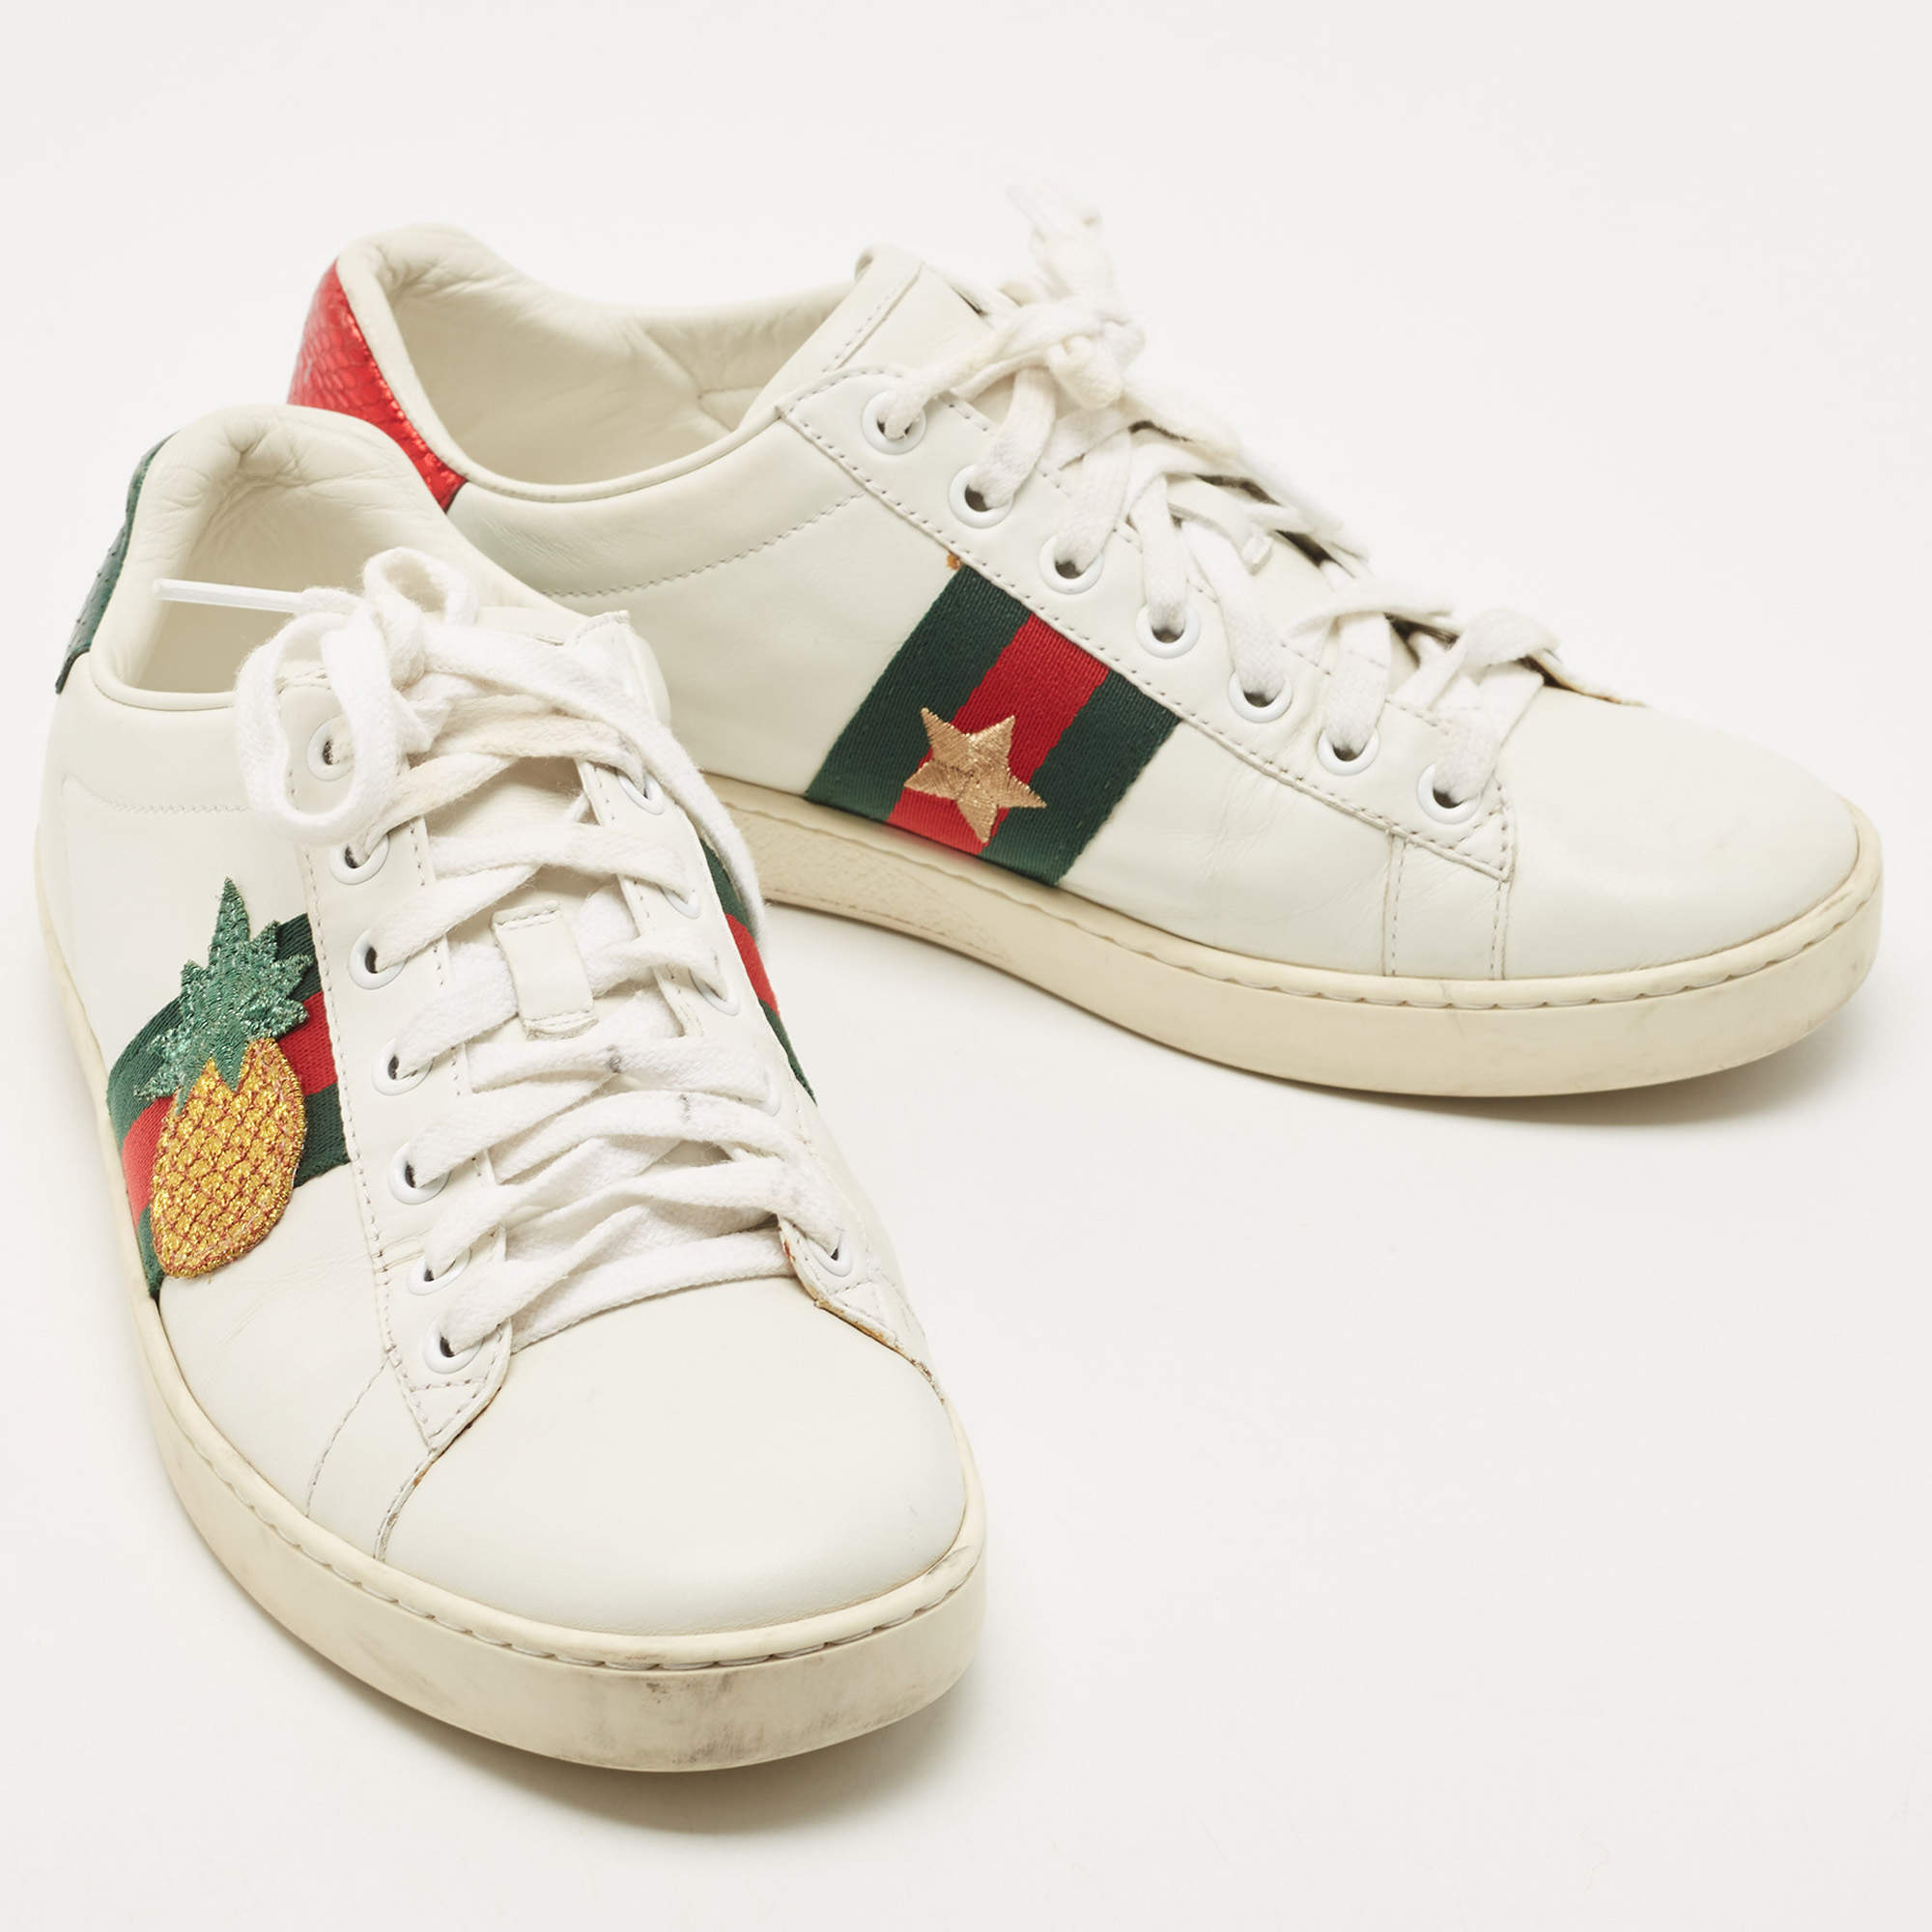 Gucci White Leather Embroidered Ladybird And Pineapple Ace Low Top Sneakers  Size 38 Gucci